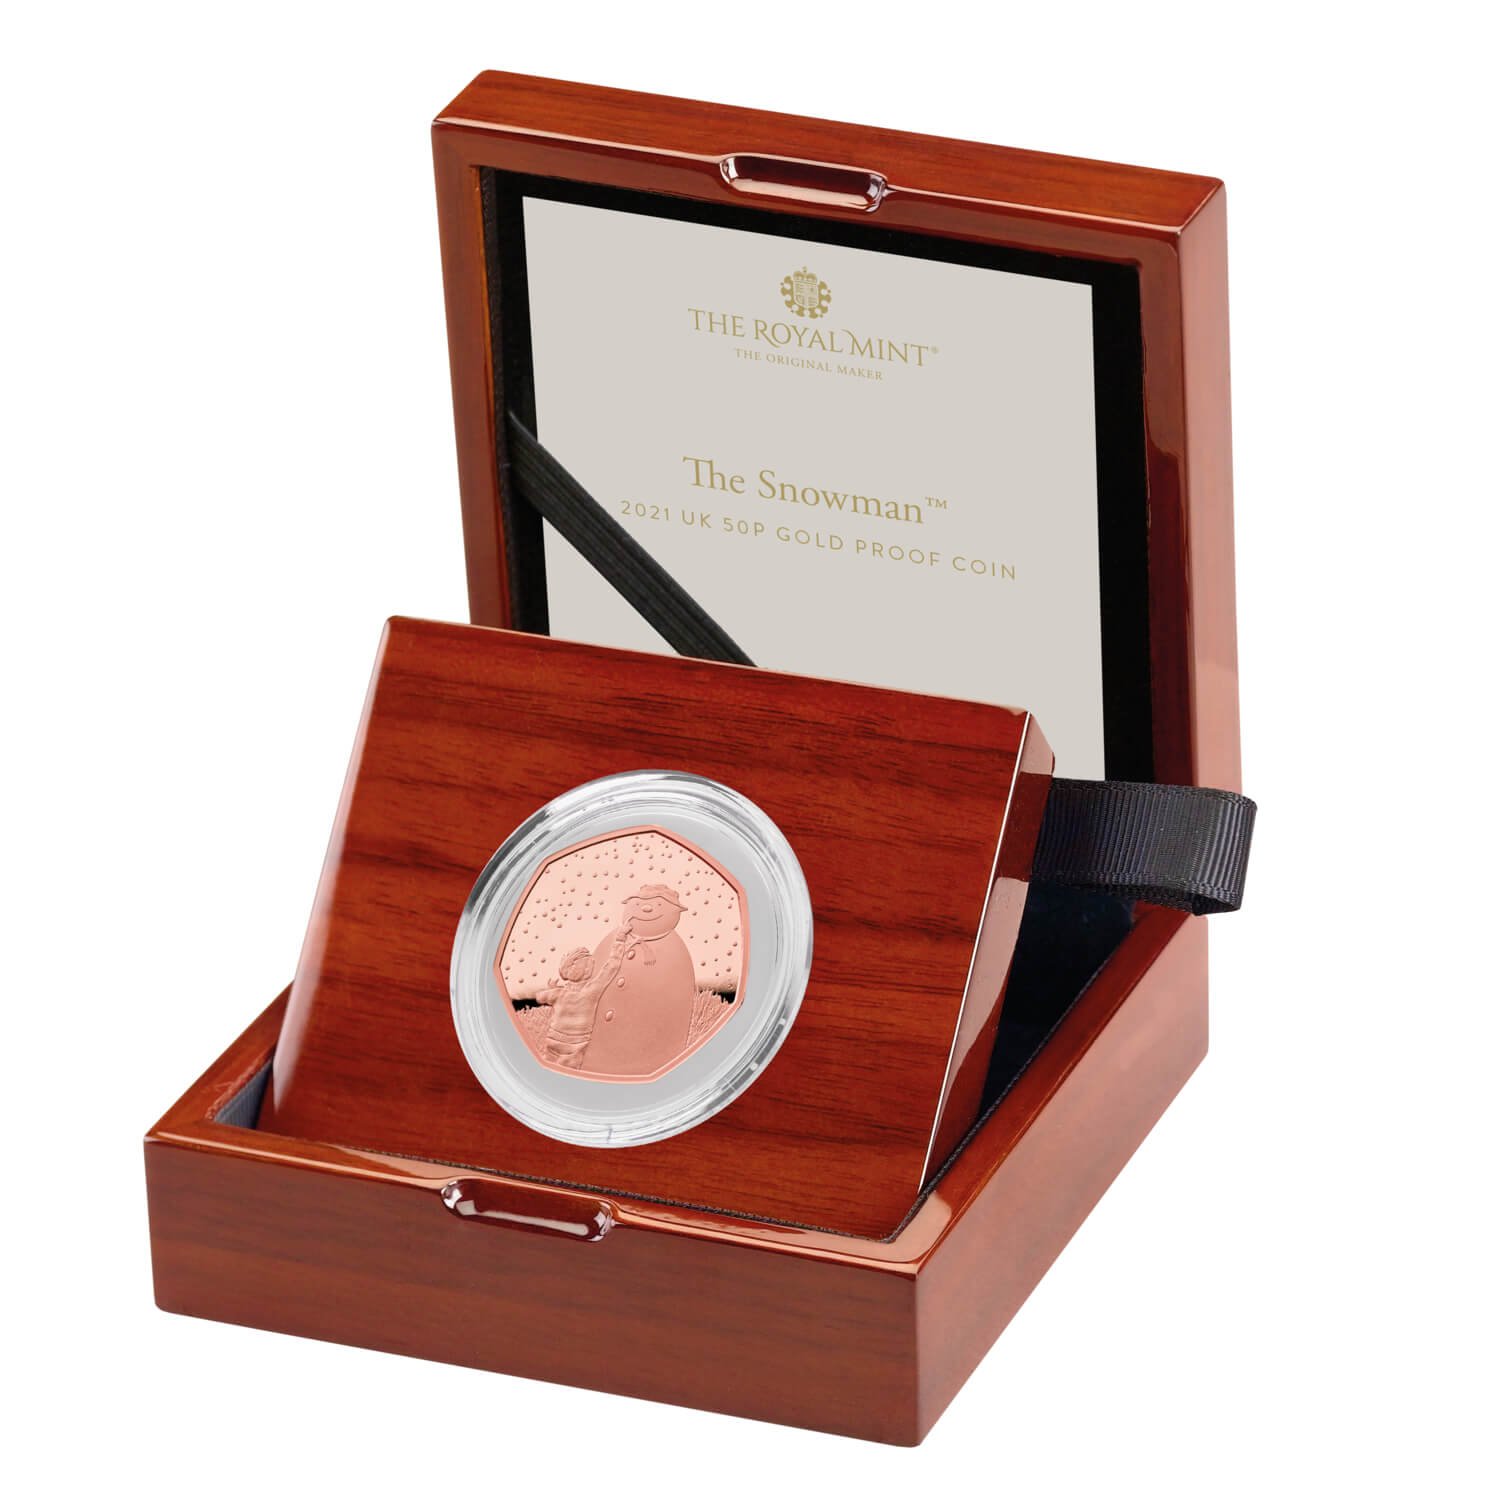 Gold Proof 2021 Snowman Coin